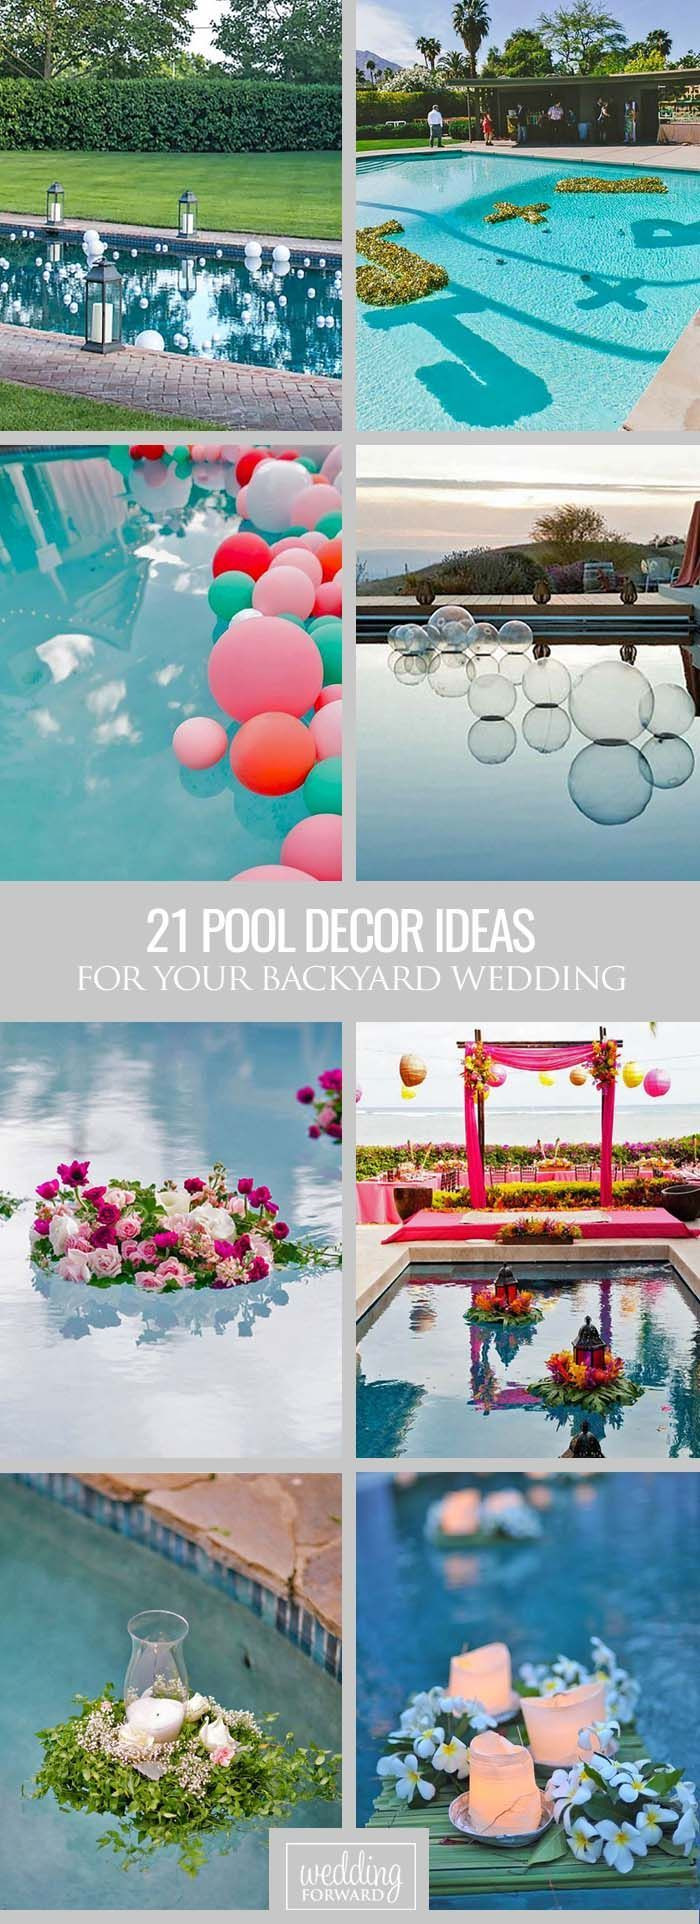 Pool Party Decoration Ideas
 Best 25 Floating pool decorations ideas on Pinterest